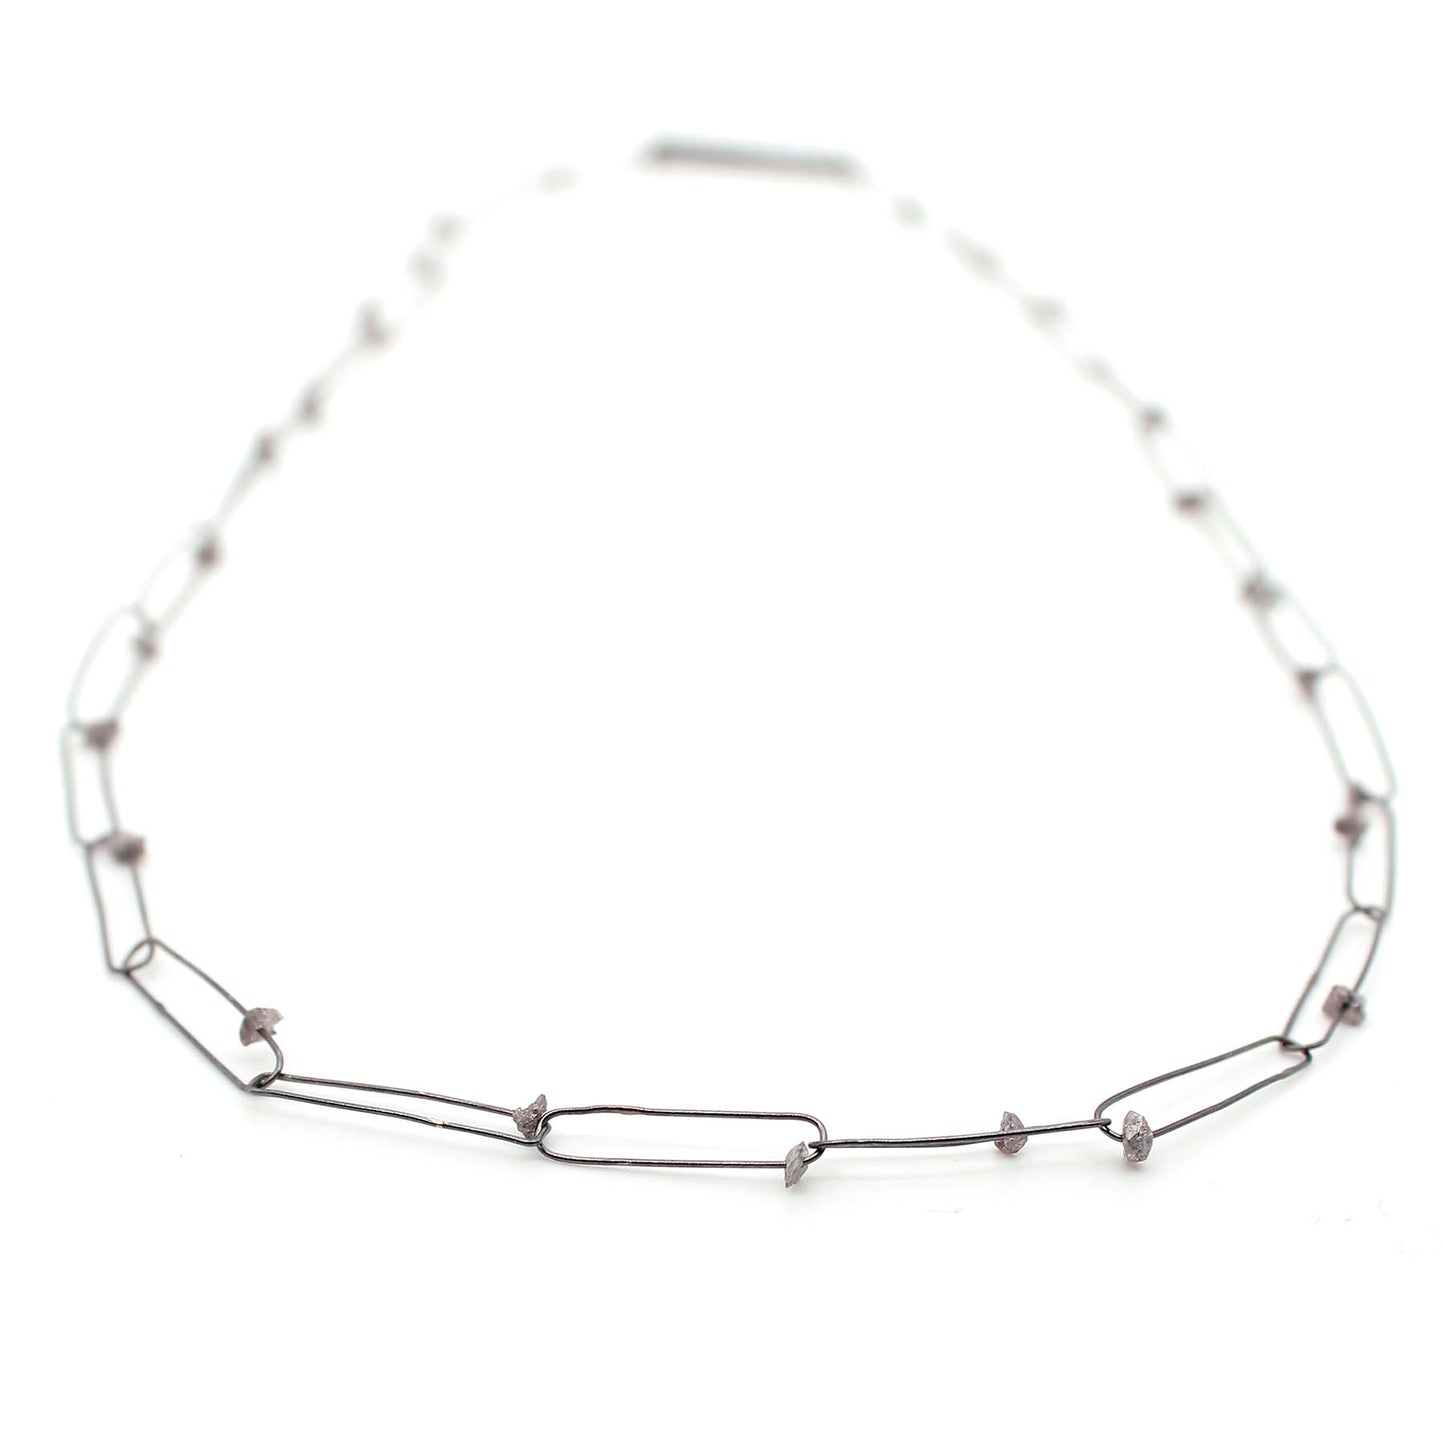 Handmade Oval Link Oxidized Sterling Silver Chain with Rough Diamonds